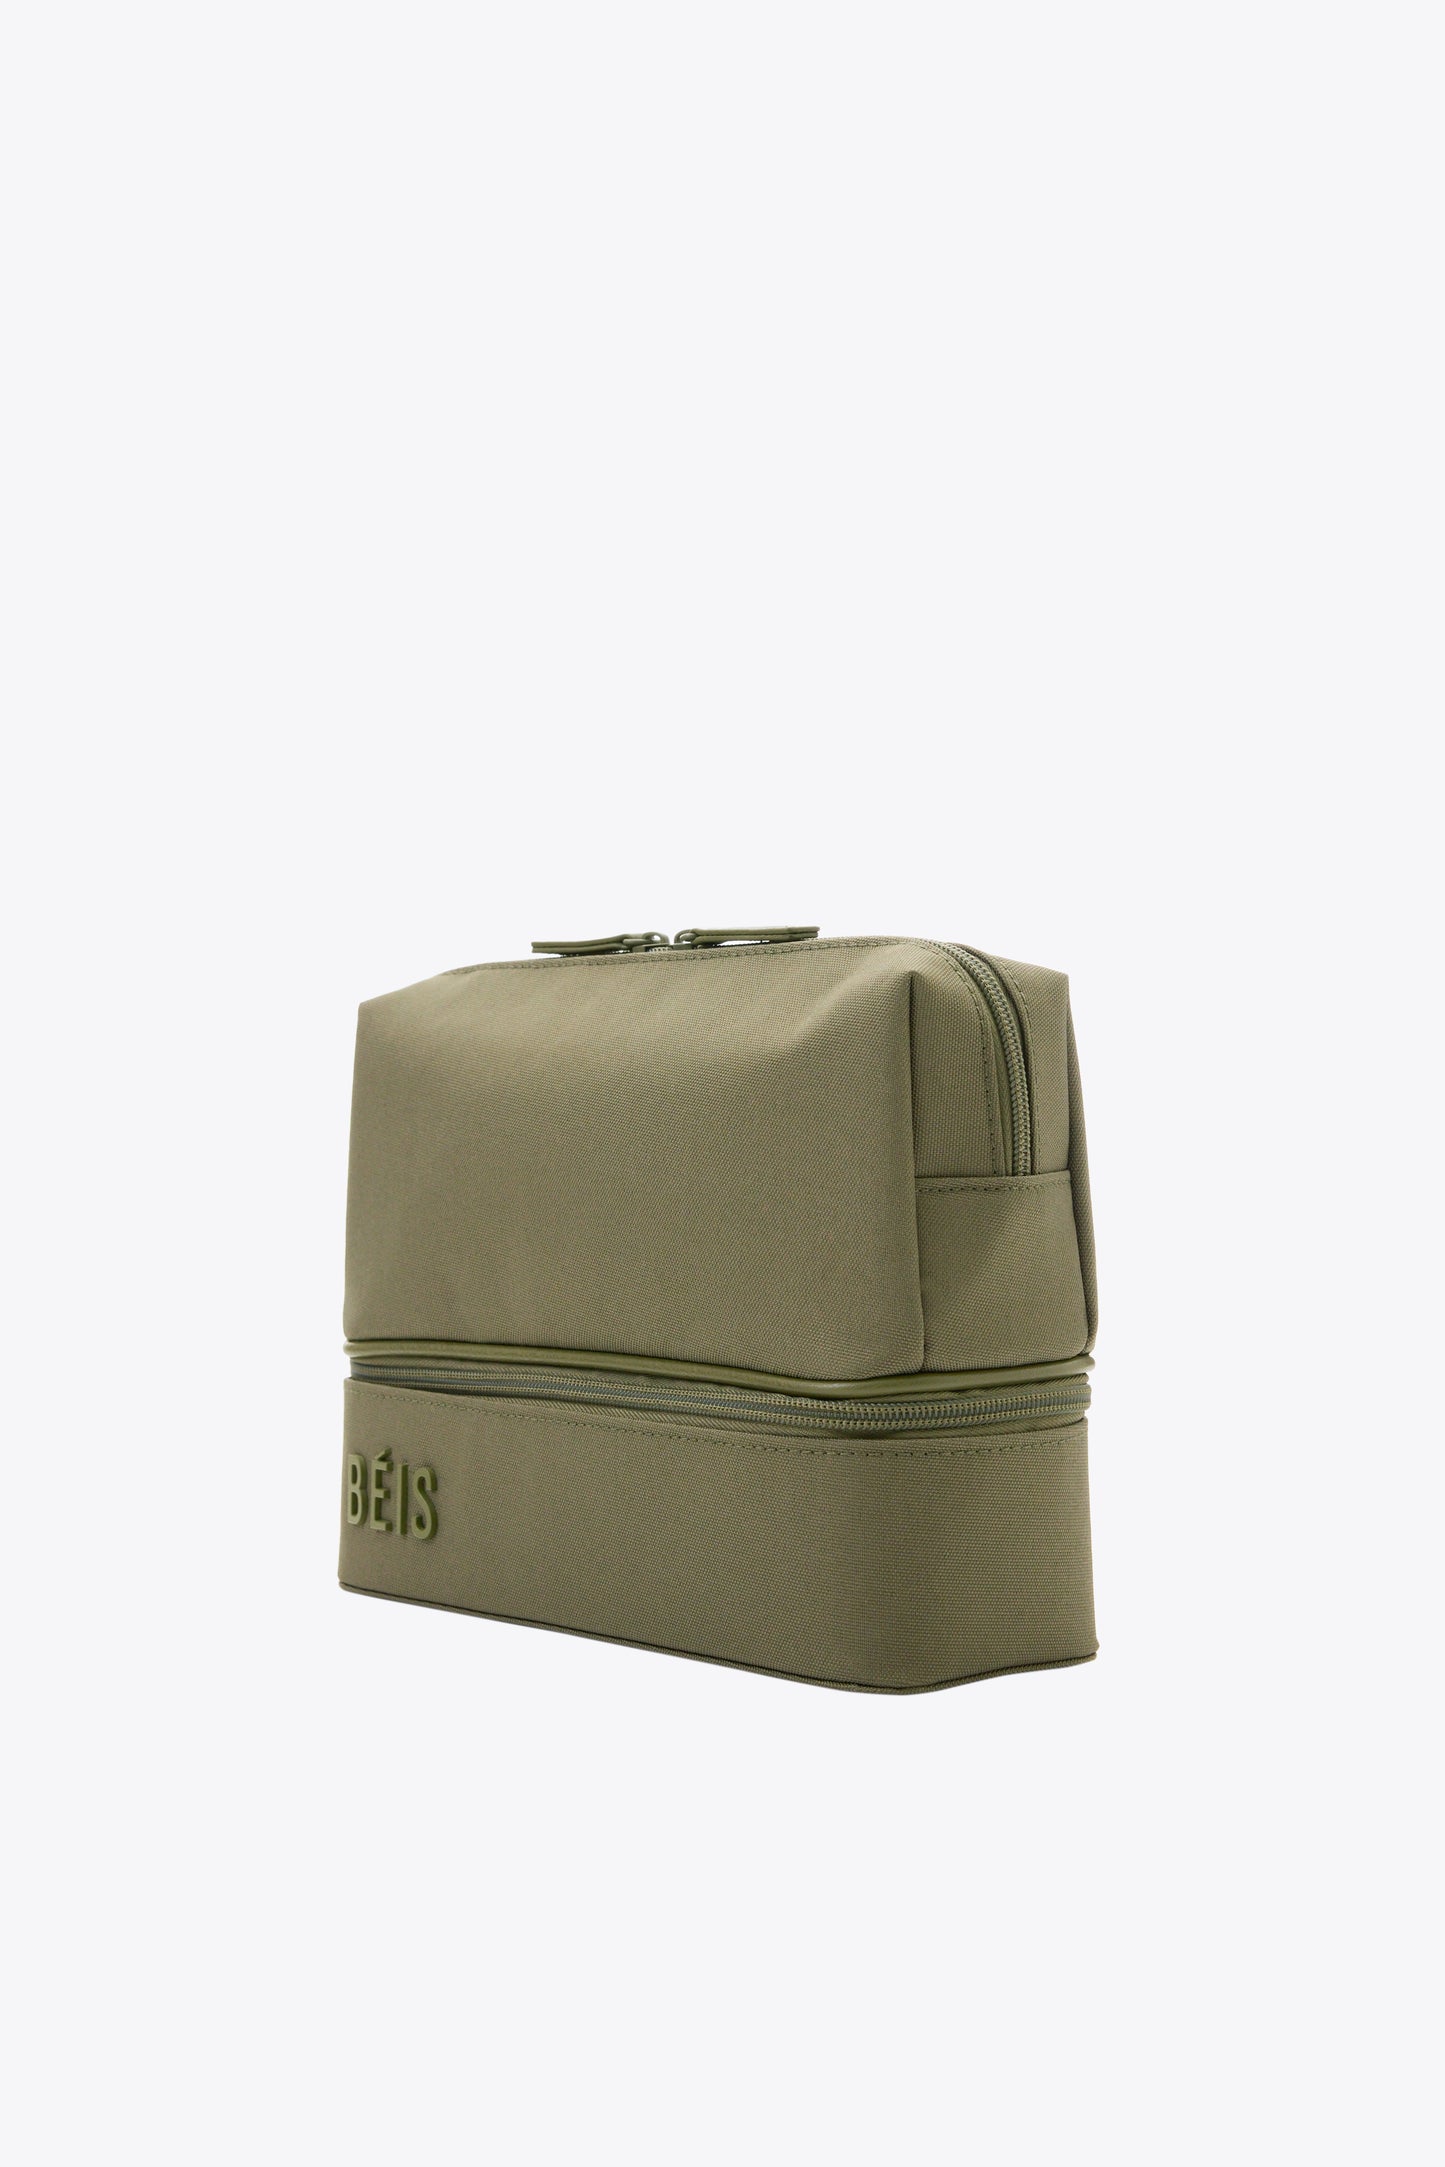 The Cosmetic Organizer in Olive